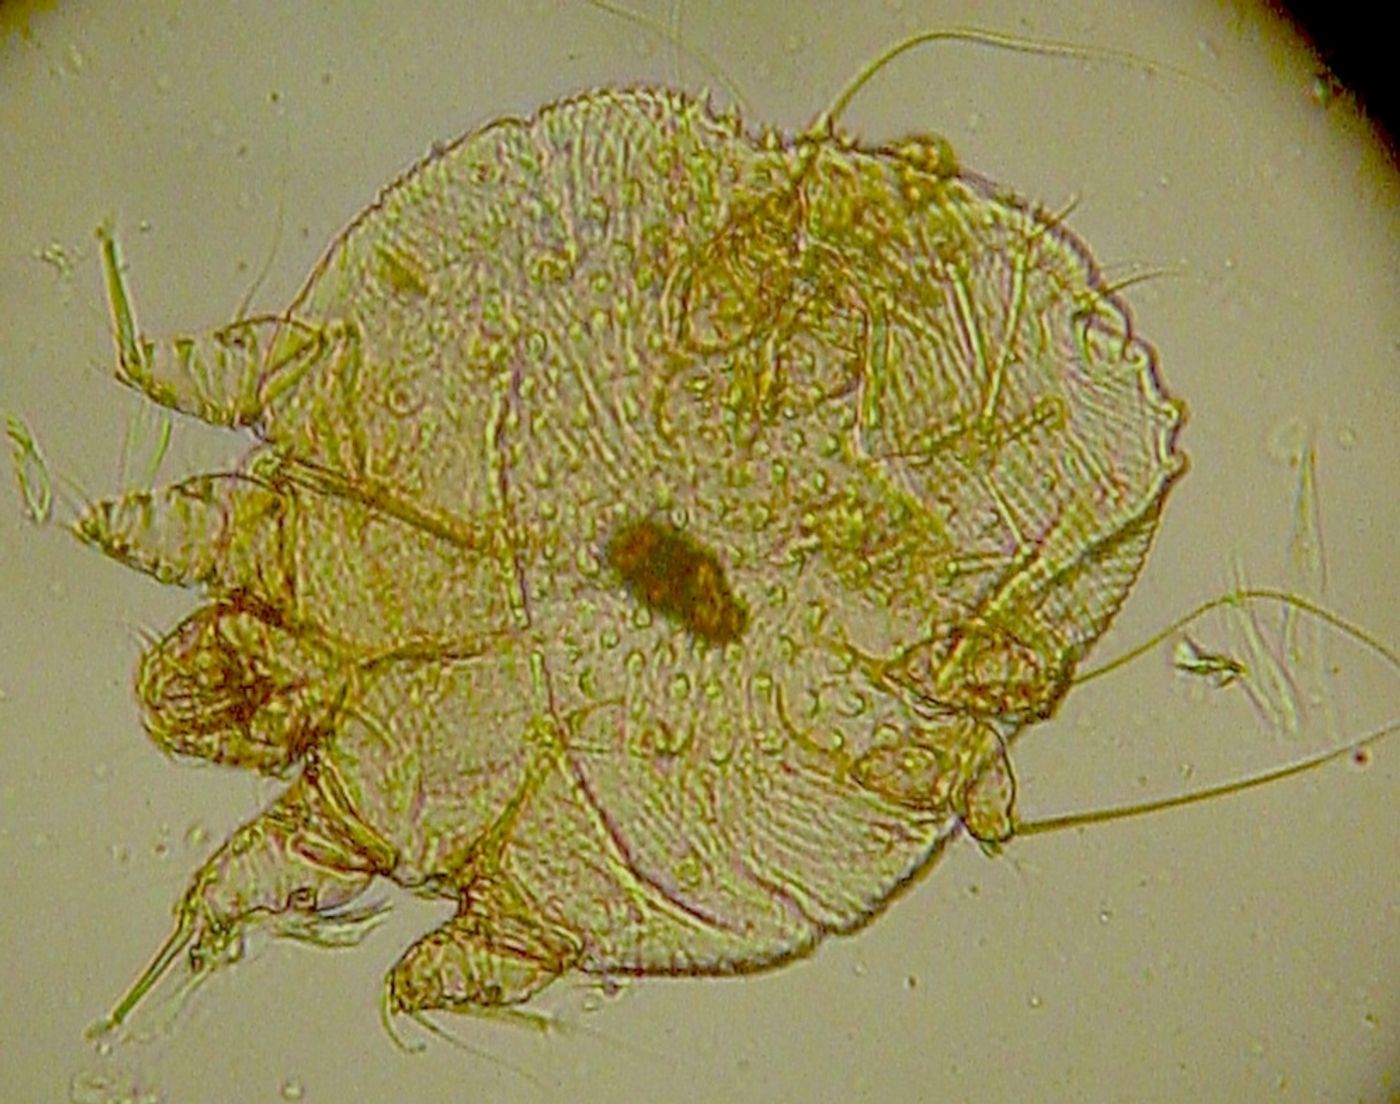 Photomicrograph of itch mite Sarcoptes scabiei from Wikimedia/Kalumet